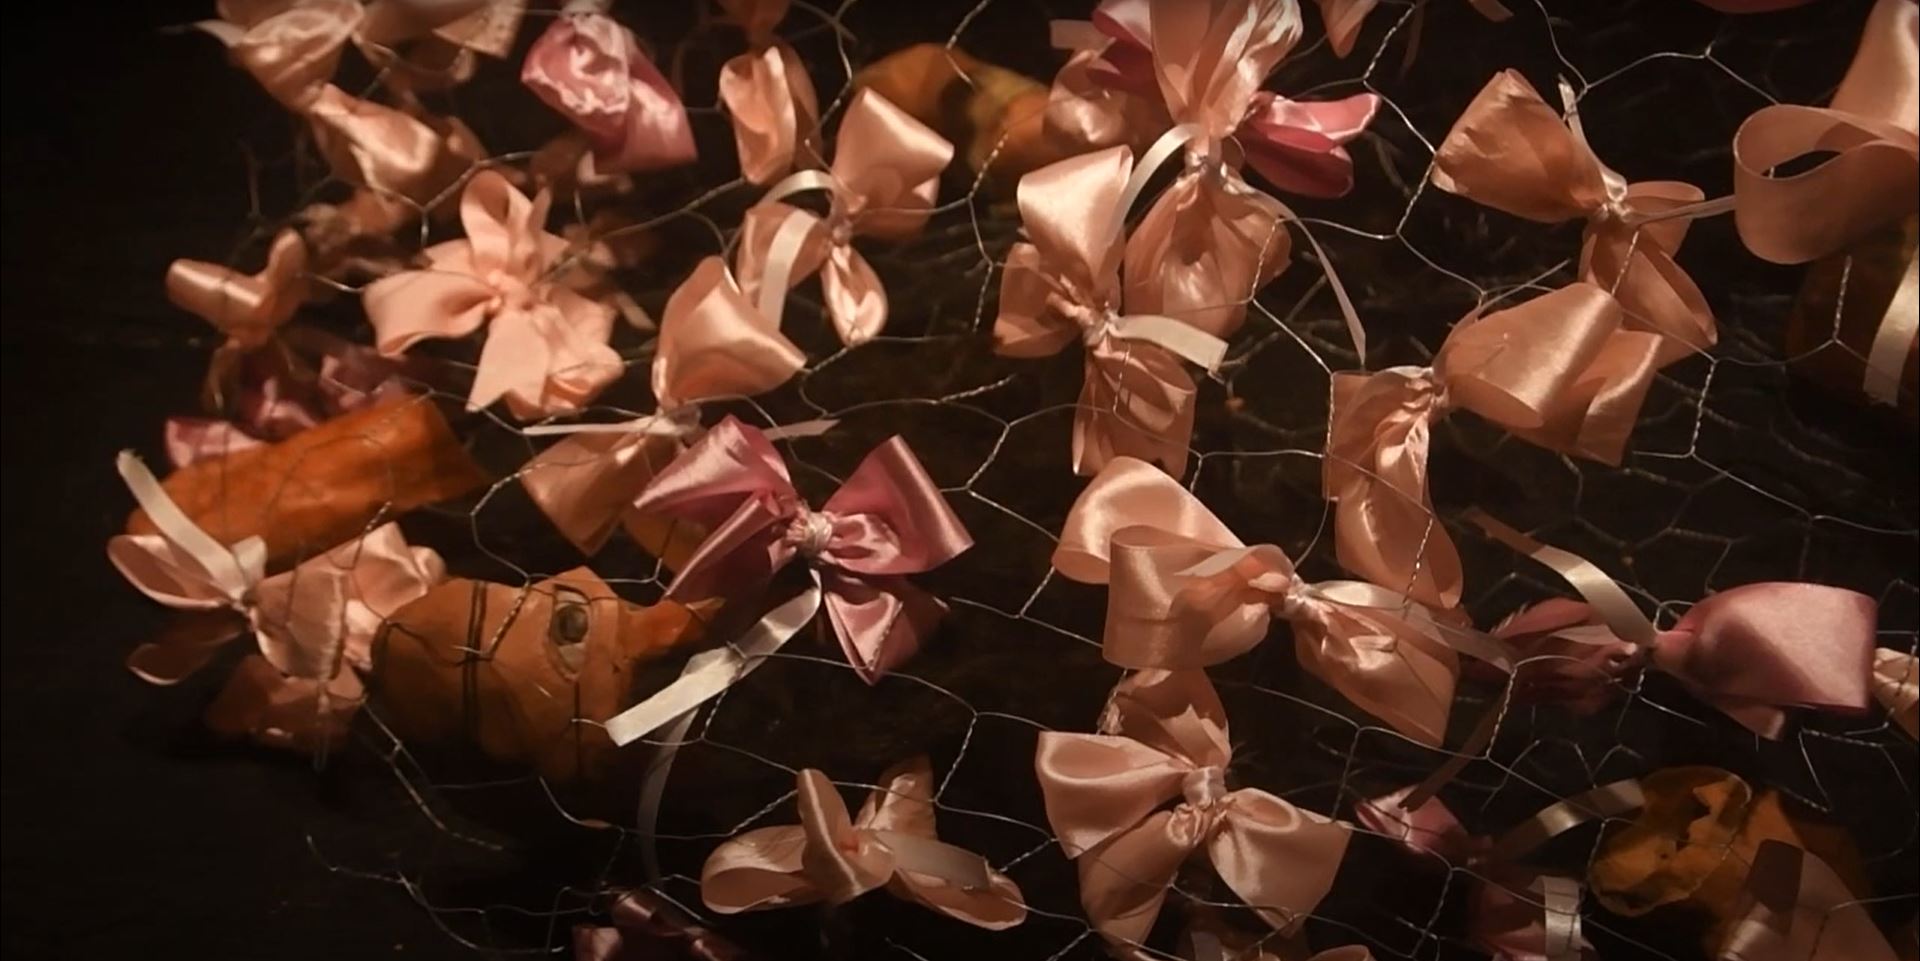 Still from Minha avó foi pega a laço showing ribbons tied to a wire mesh.